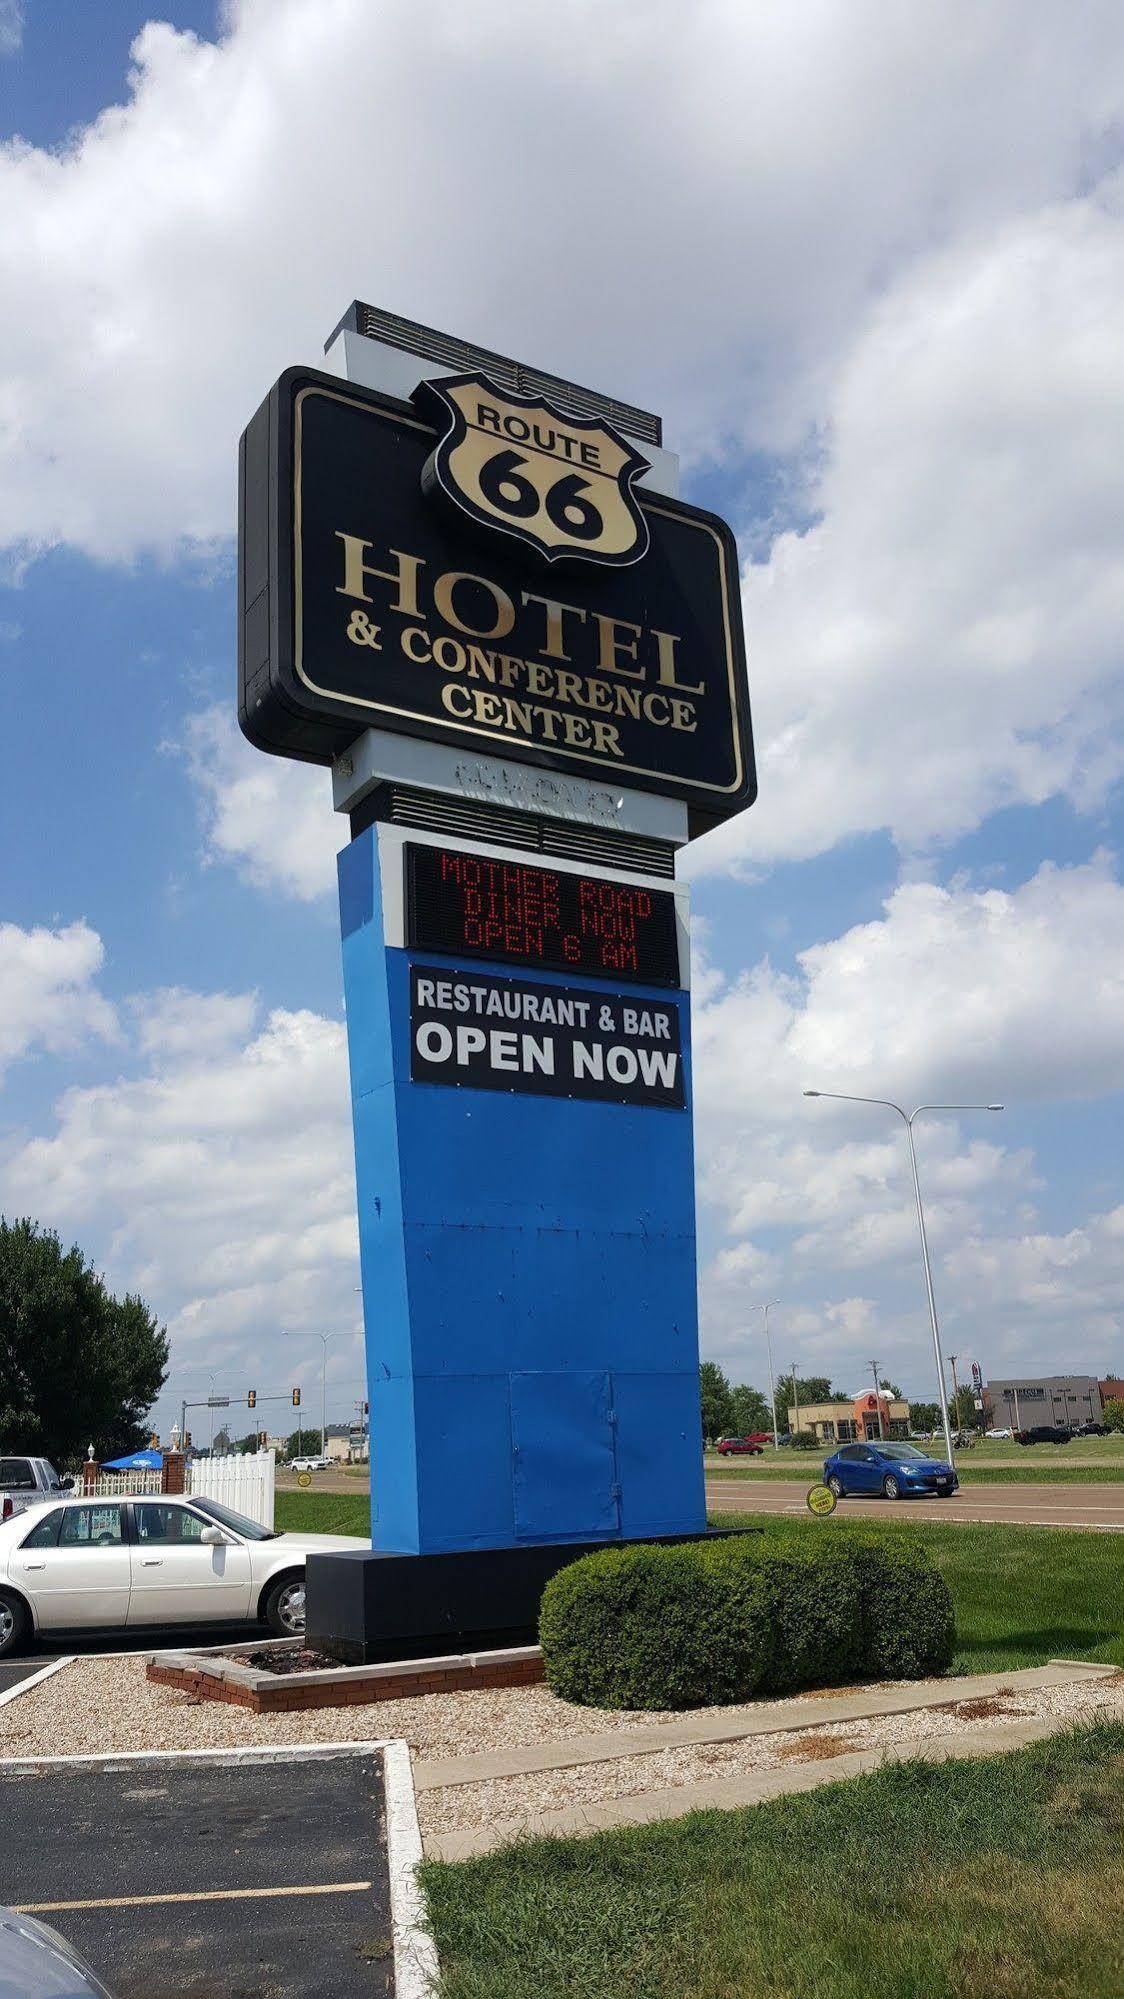 Route 66 Hotel And Conference